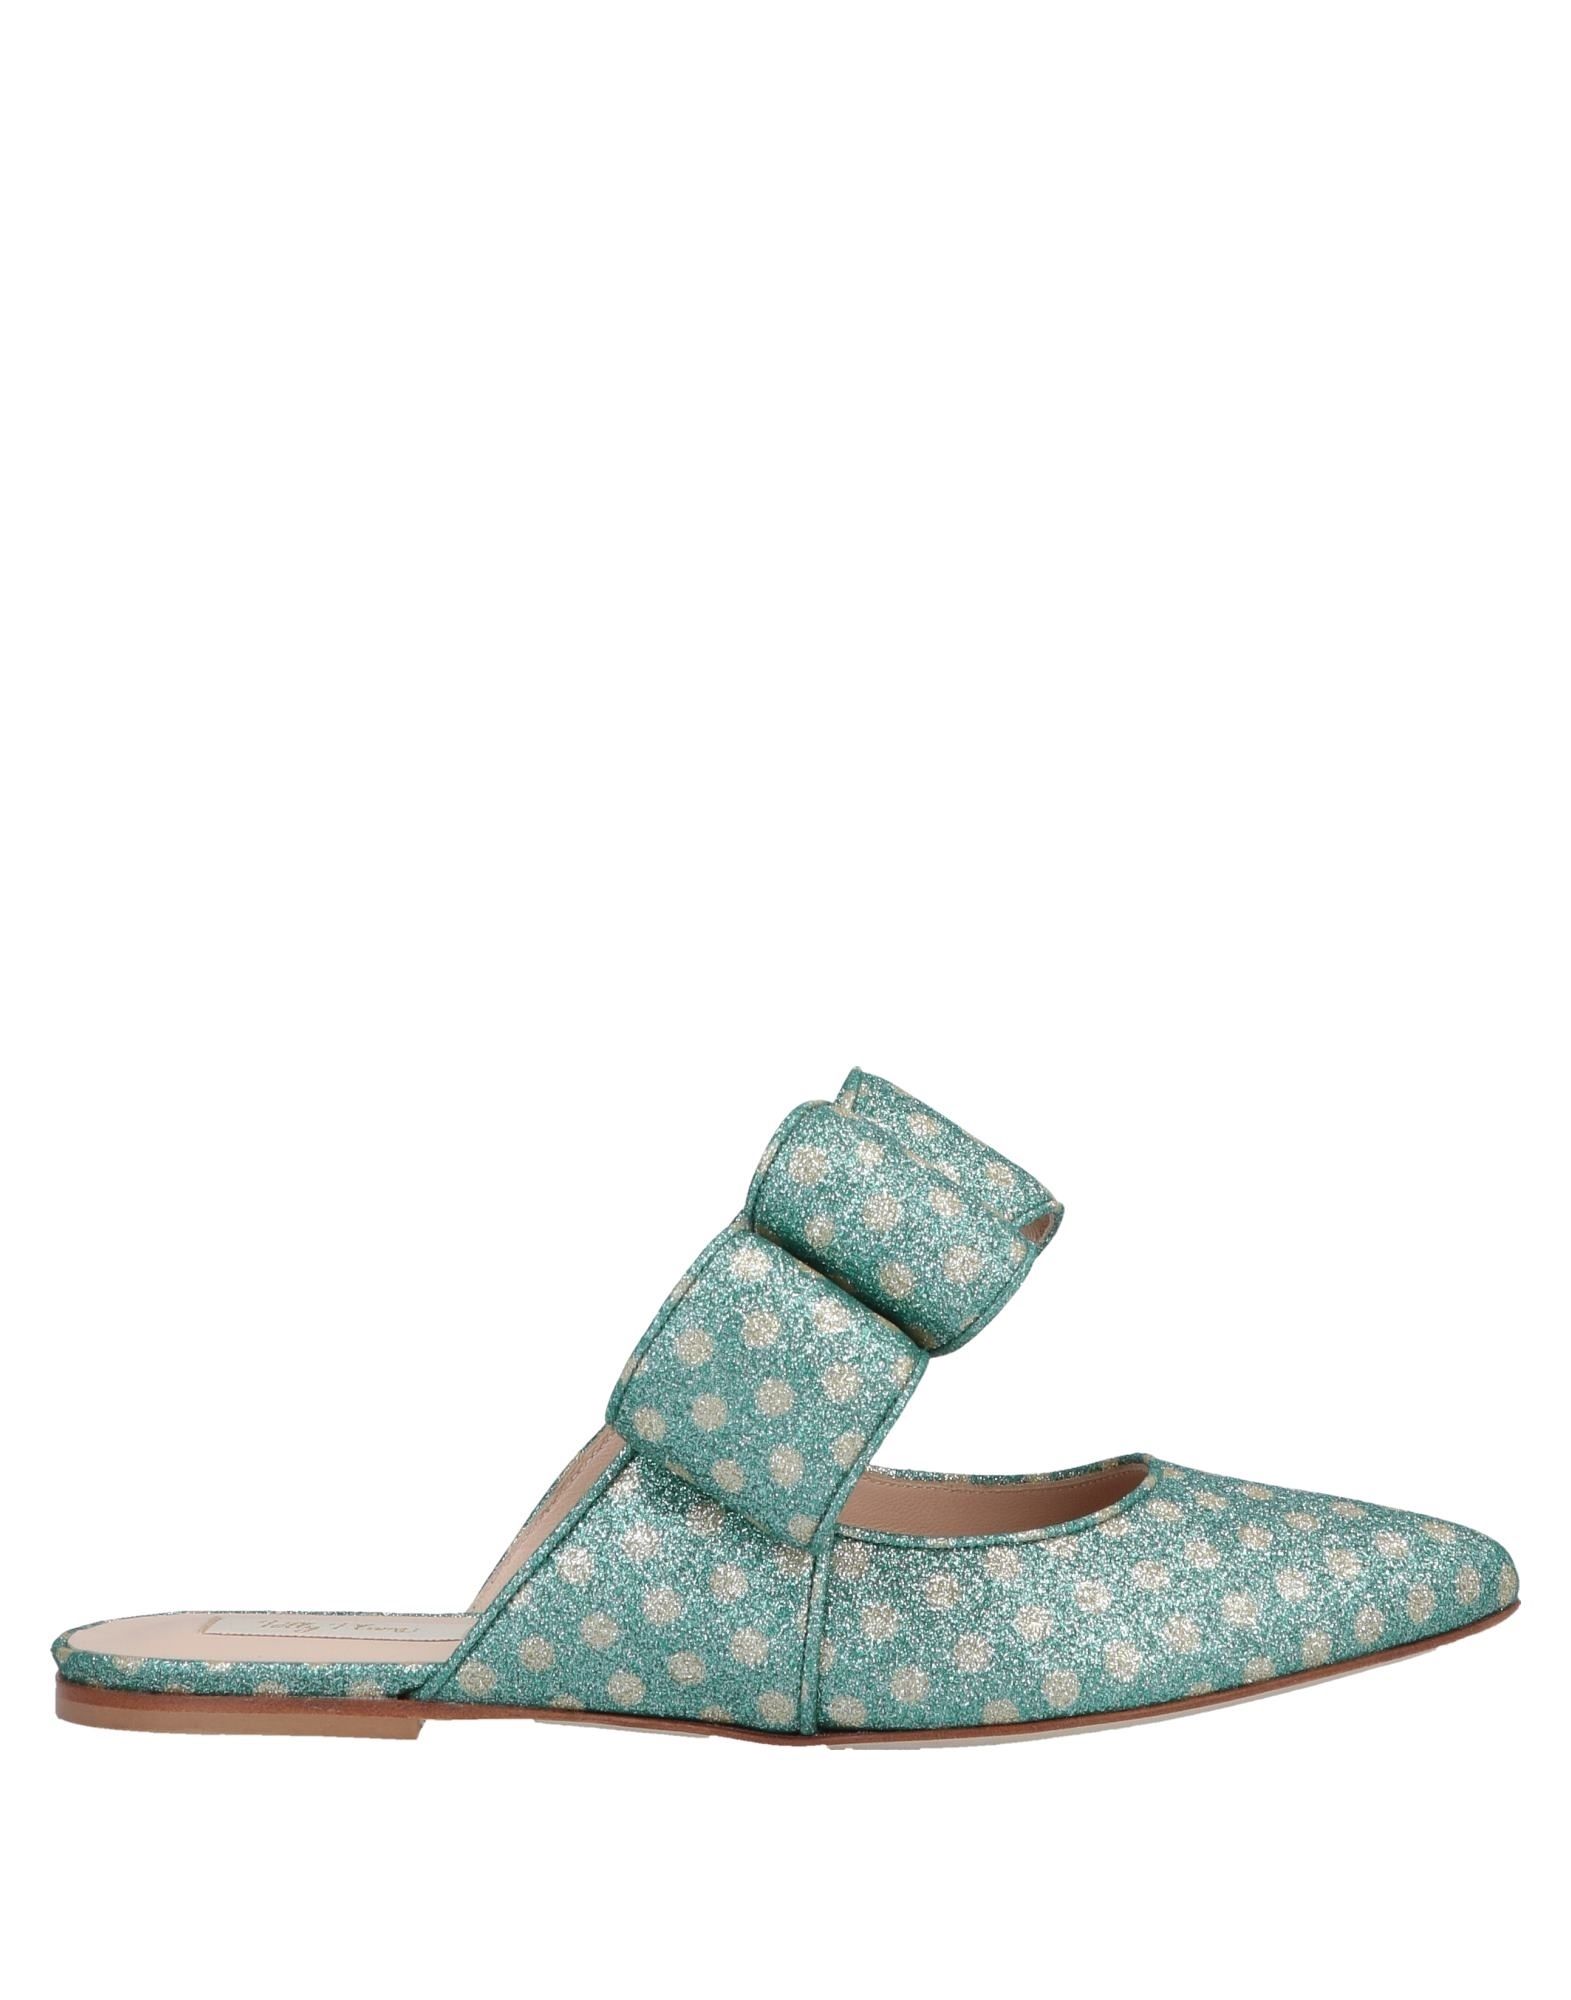 Polly Plume Mules